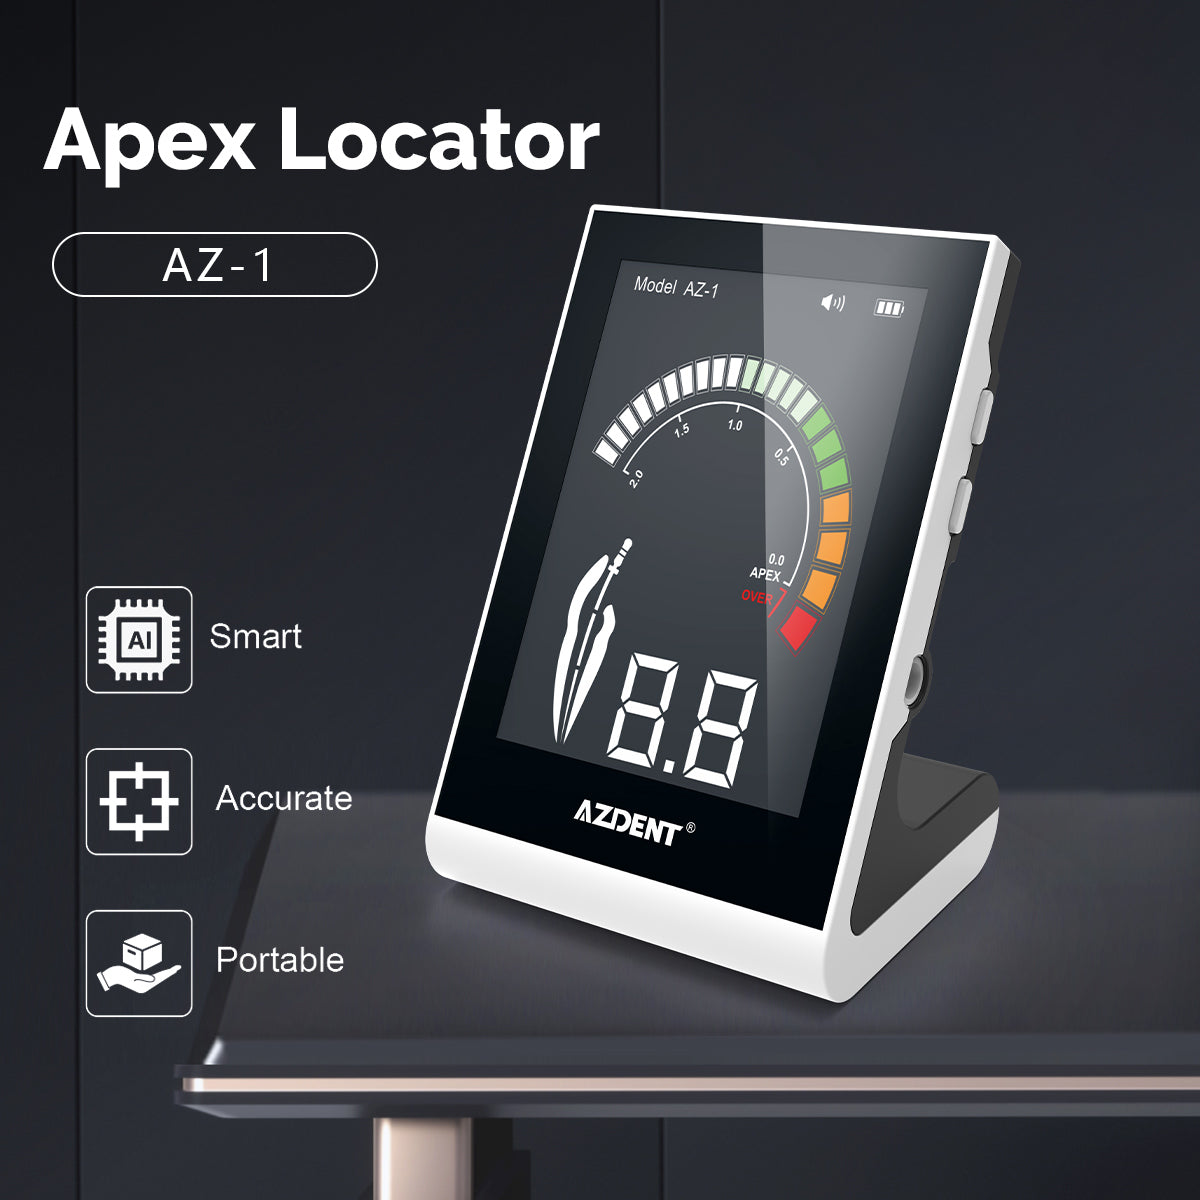 AZDENT Dental Endodontic Apex Locator Root Canal Measurement Tool Multi-color Screen Touch Inductive Button - azdentall.com